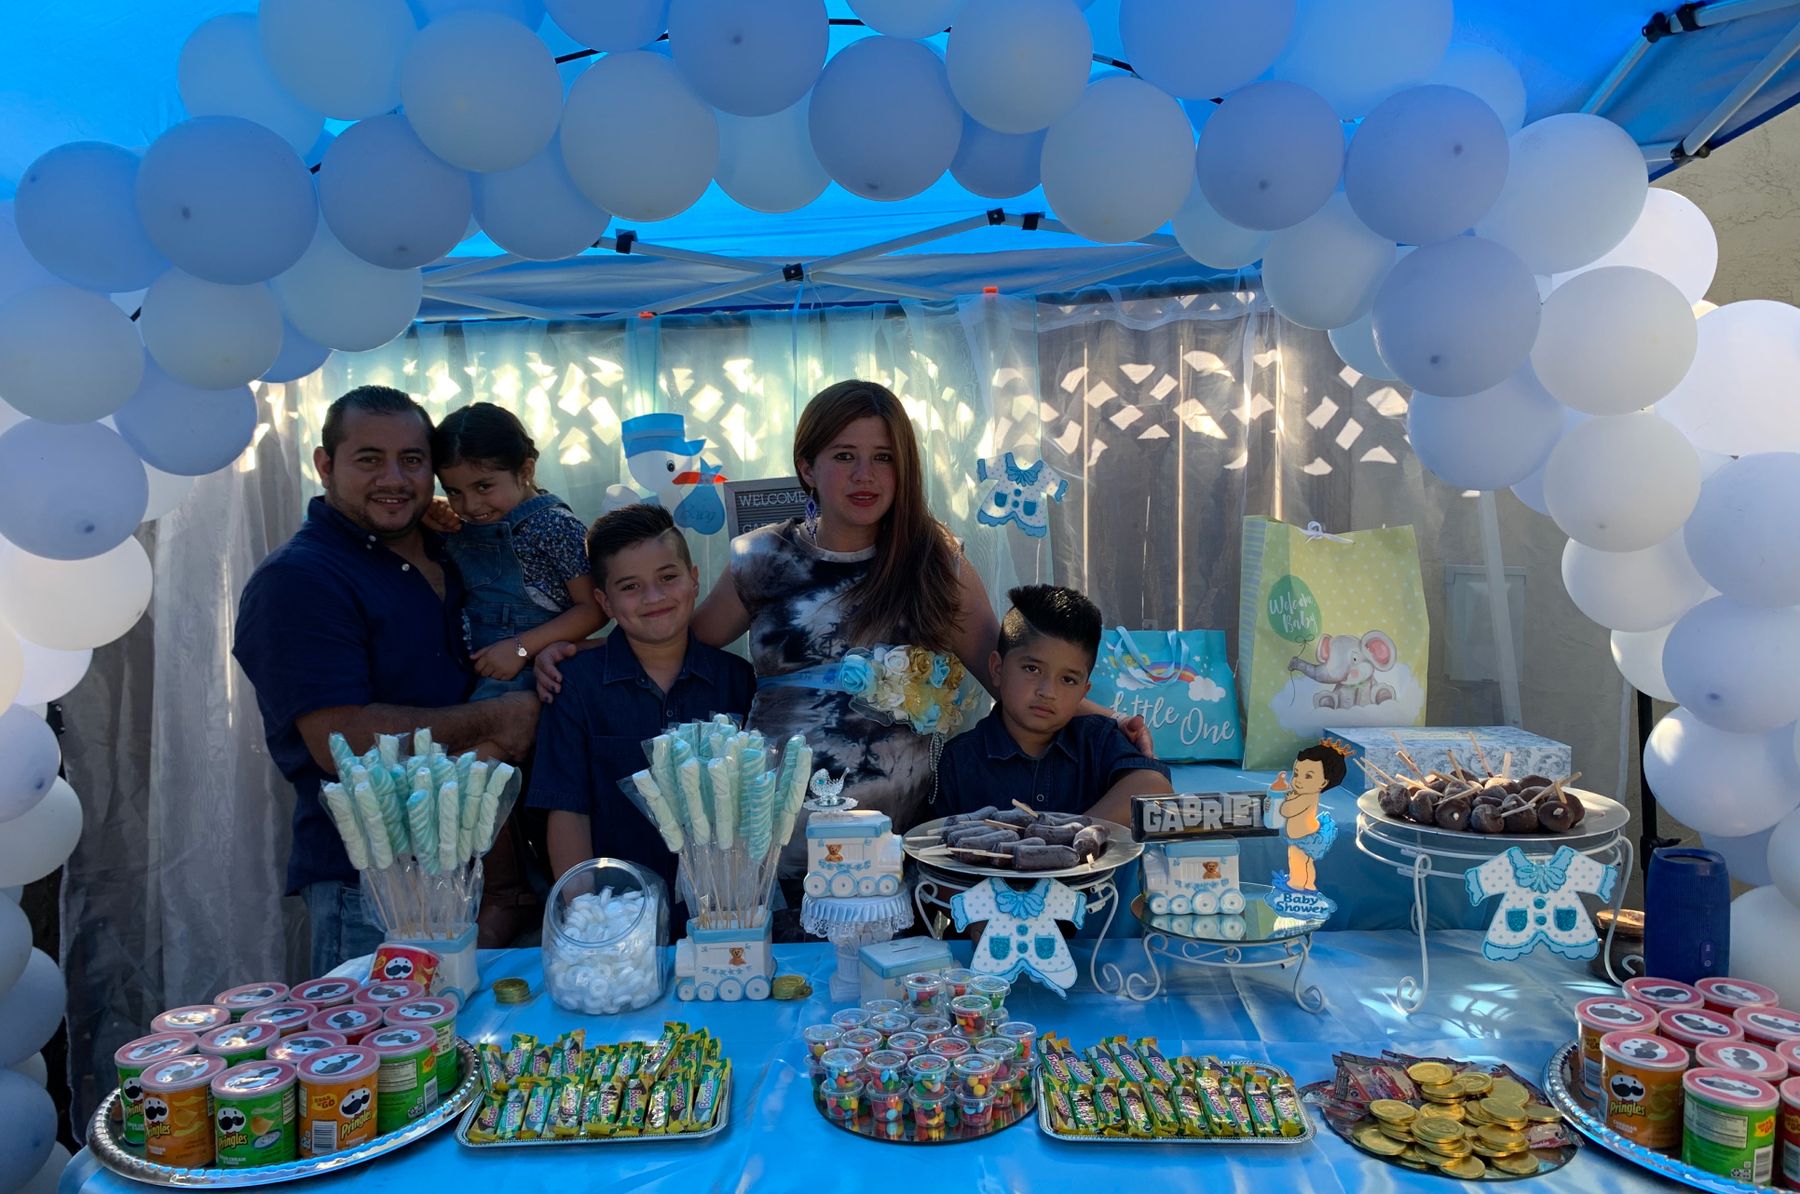 Smiling family with three boys celebrating at a baby shower with a blue baloon arch and a table full of candy and snacks. 